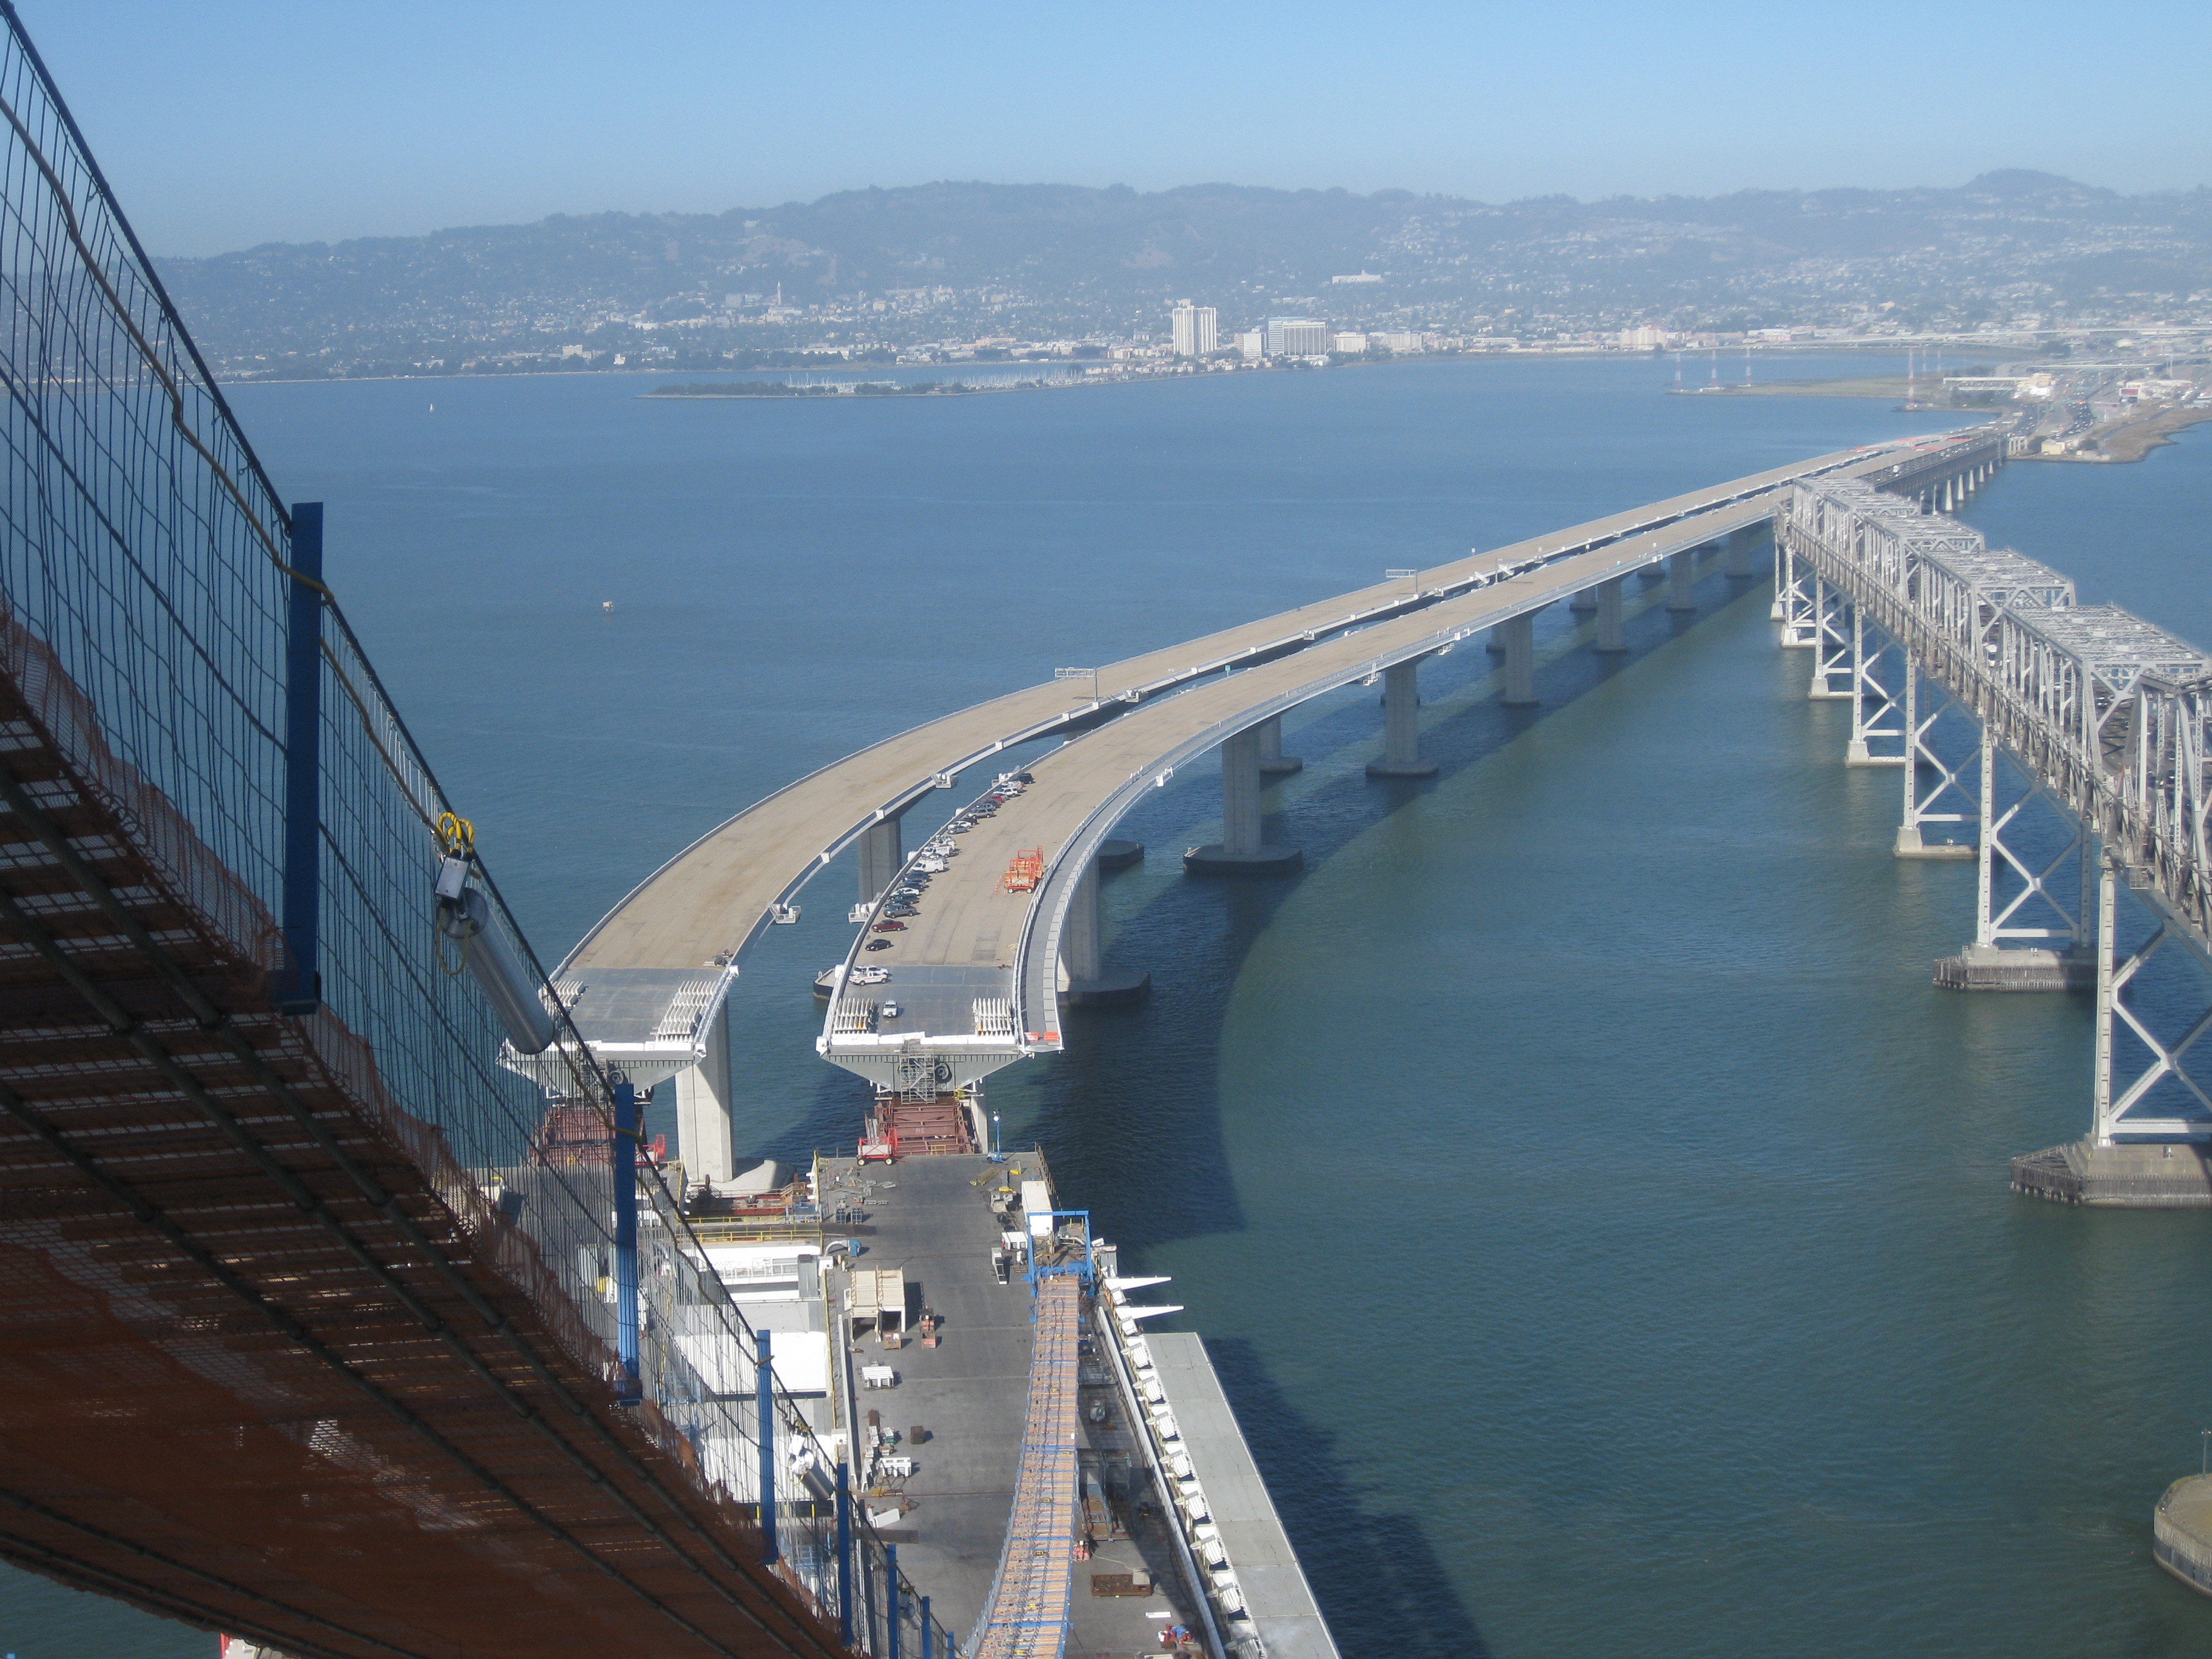 Bad Bay Bridge Bolts: More Thorough Inspection Job Promised After “Very High” Failure Rate